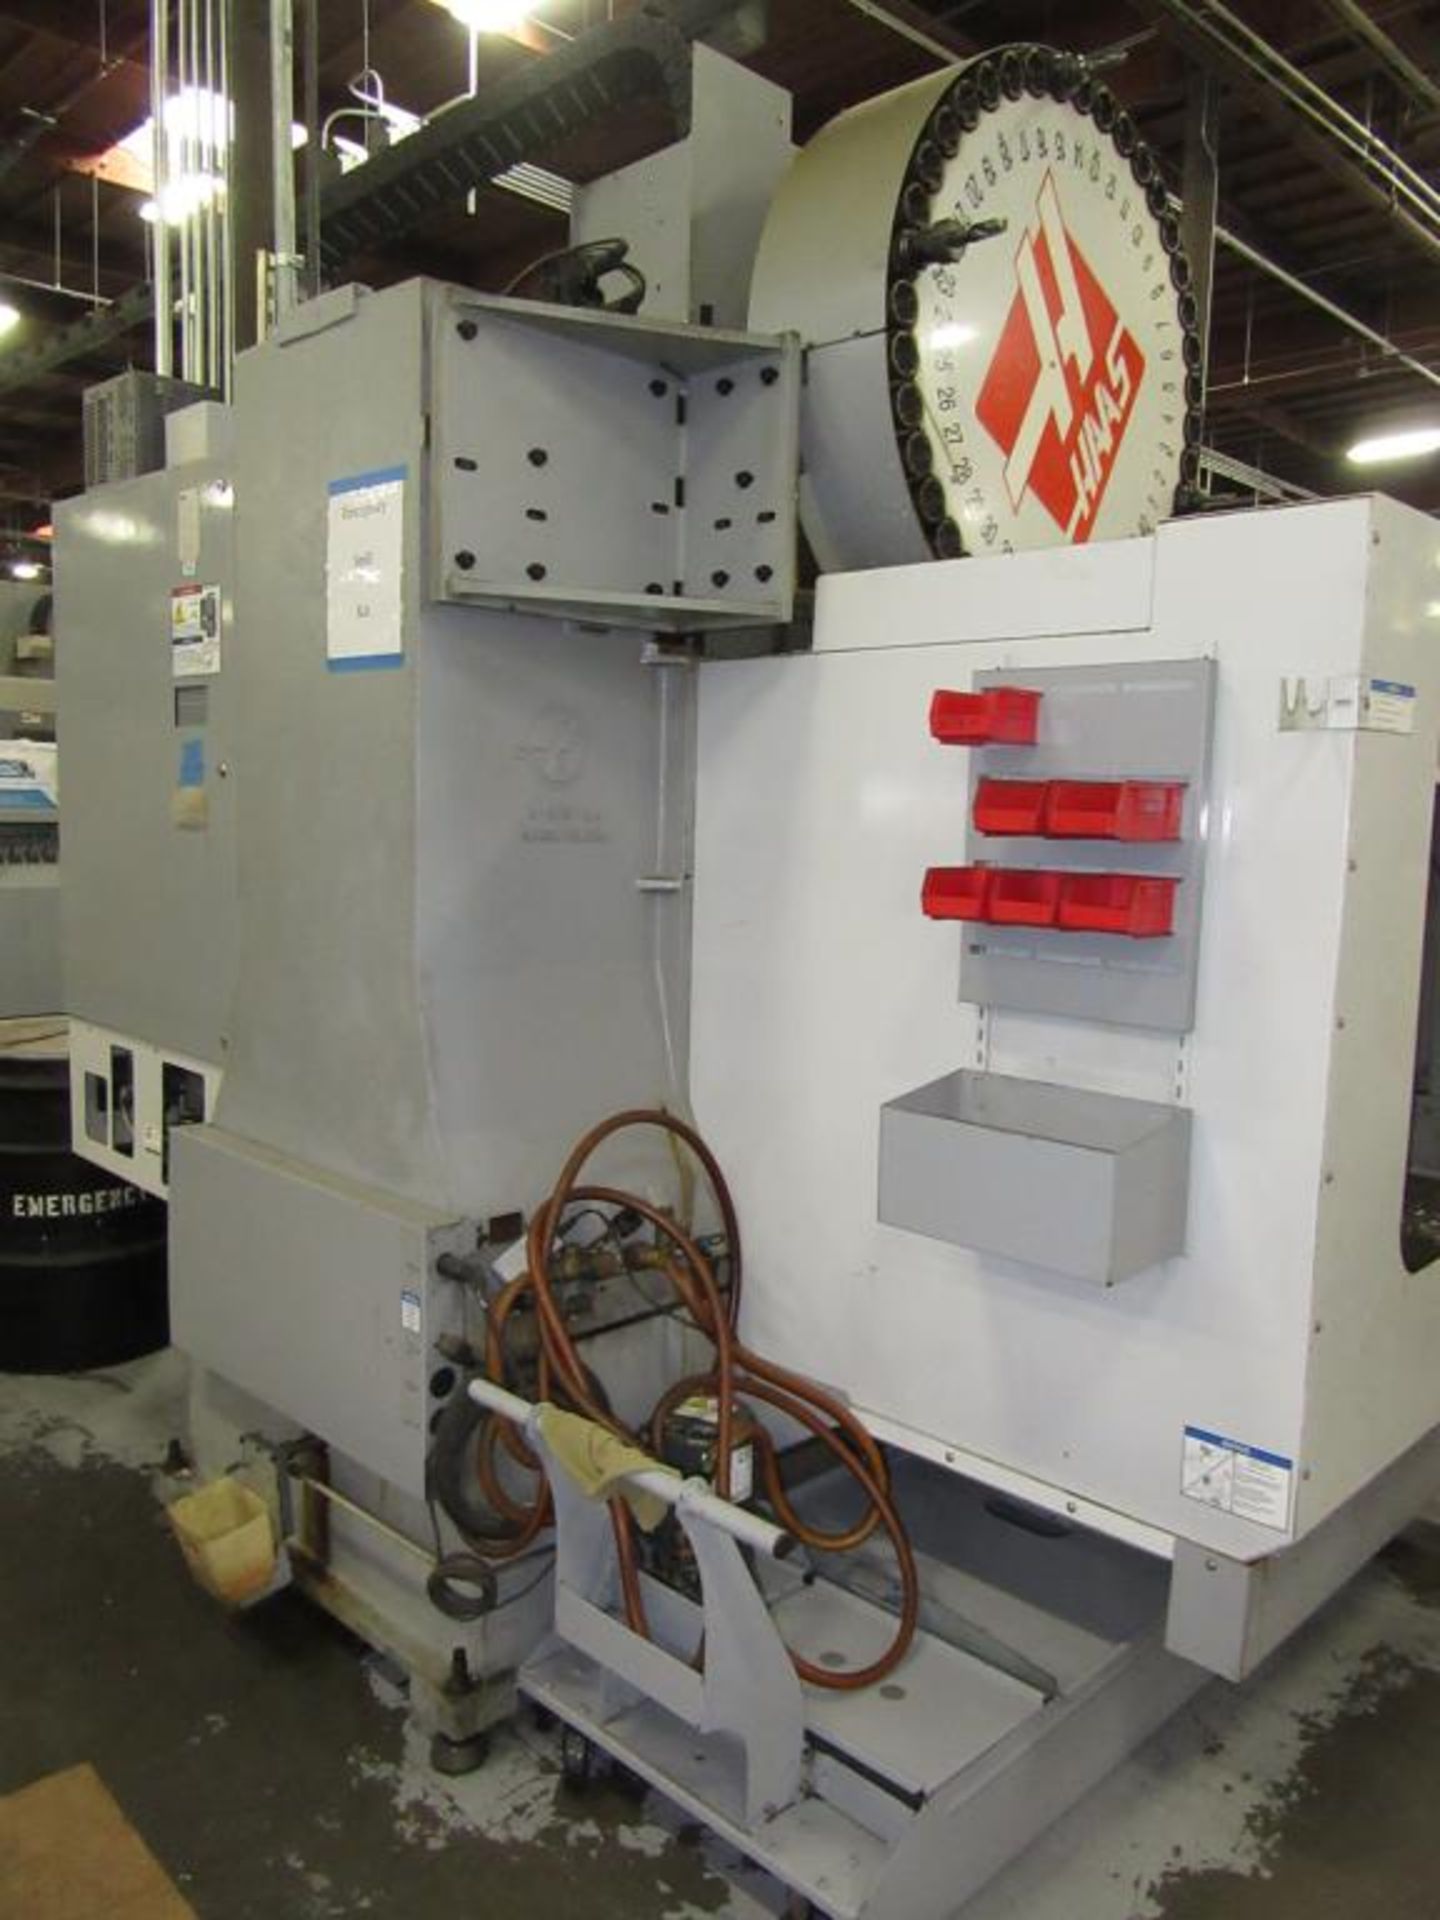 Haas VF-3BYT. 2008 - CNC Vertical Machining Center with Haas 3-Axis Control Panel, Table Size 54"L x - Image 10 of 15